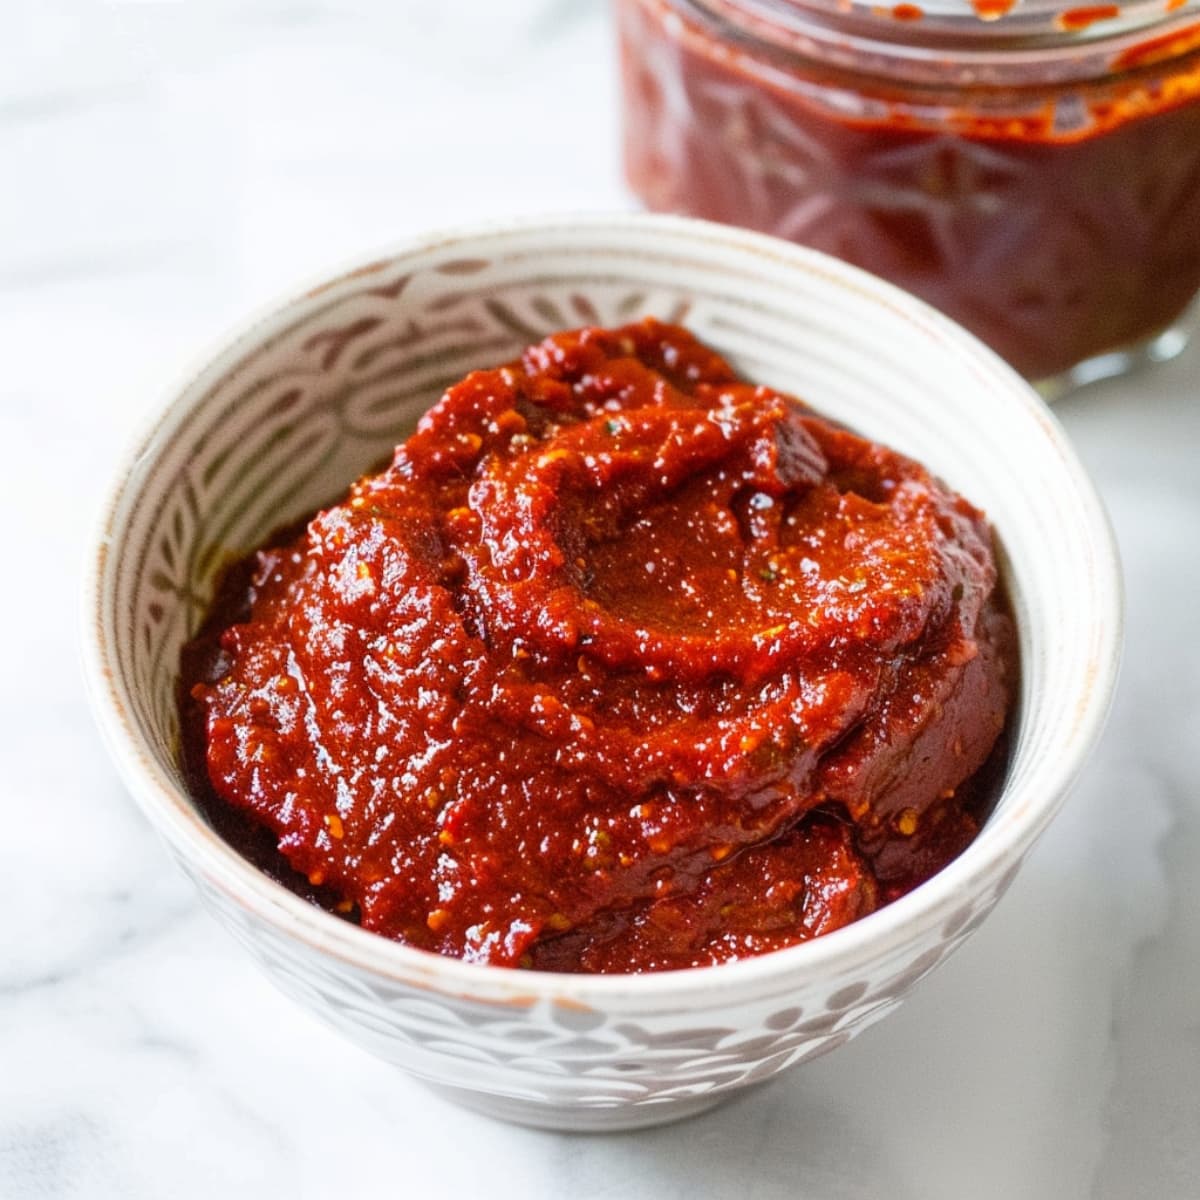 Gochujang or Korean Chili Paste in a Bowl on a White Marble Table